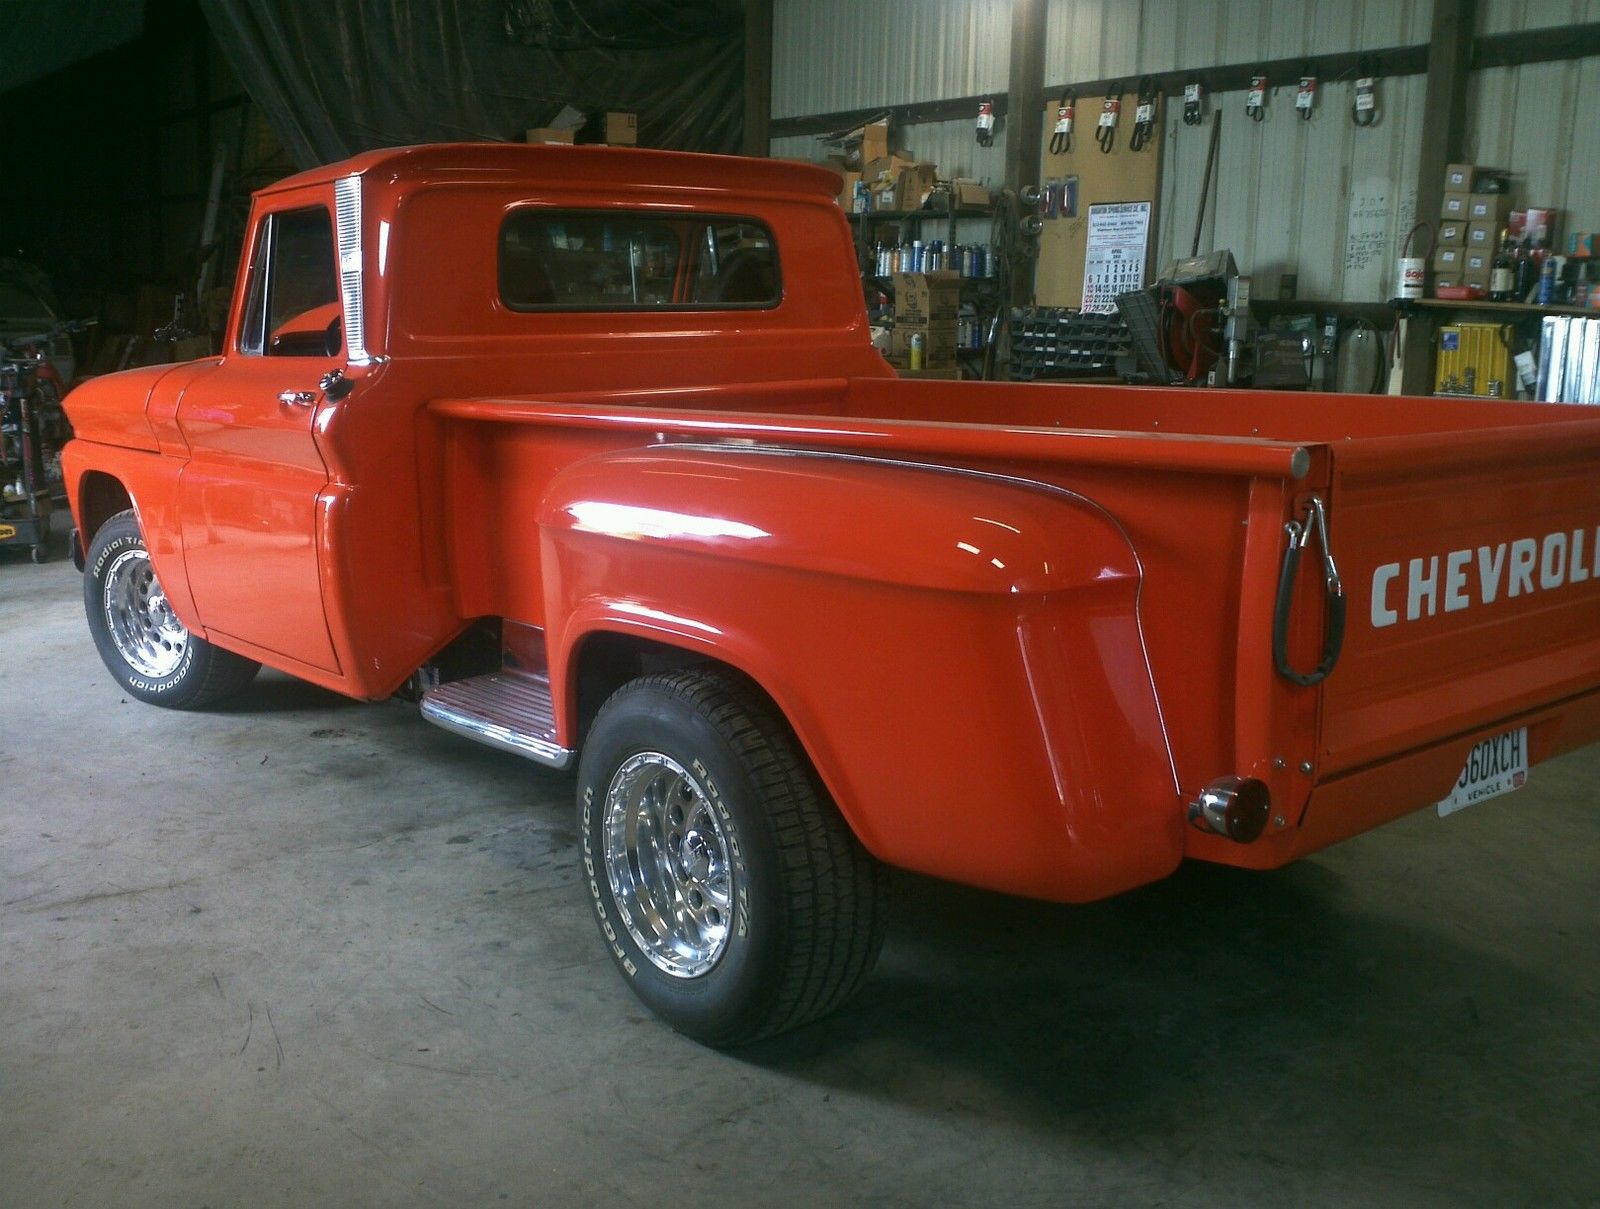 1965 Chevy Stepside Pick Up.